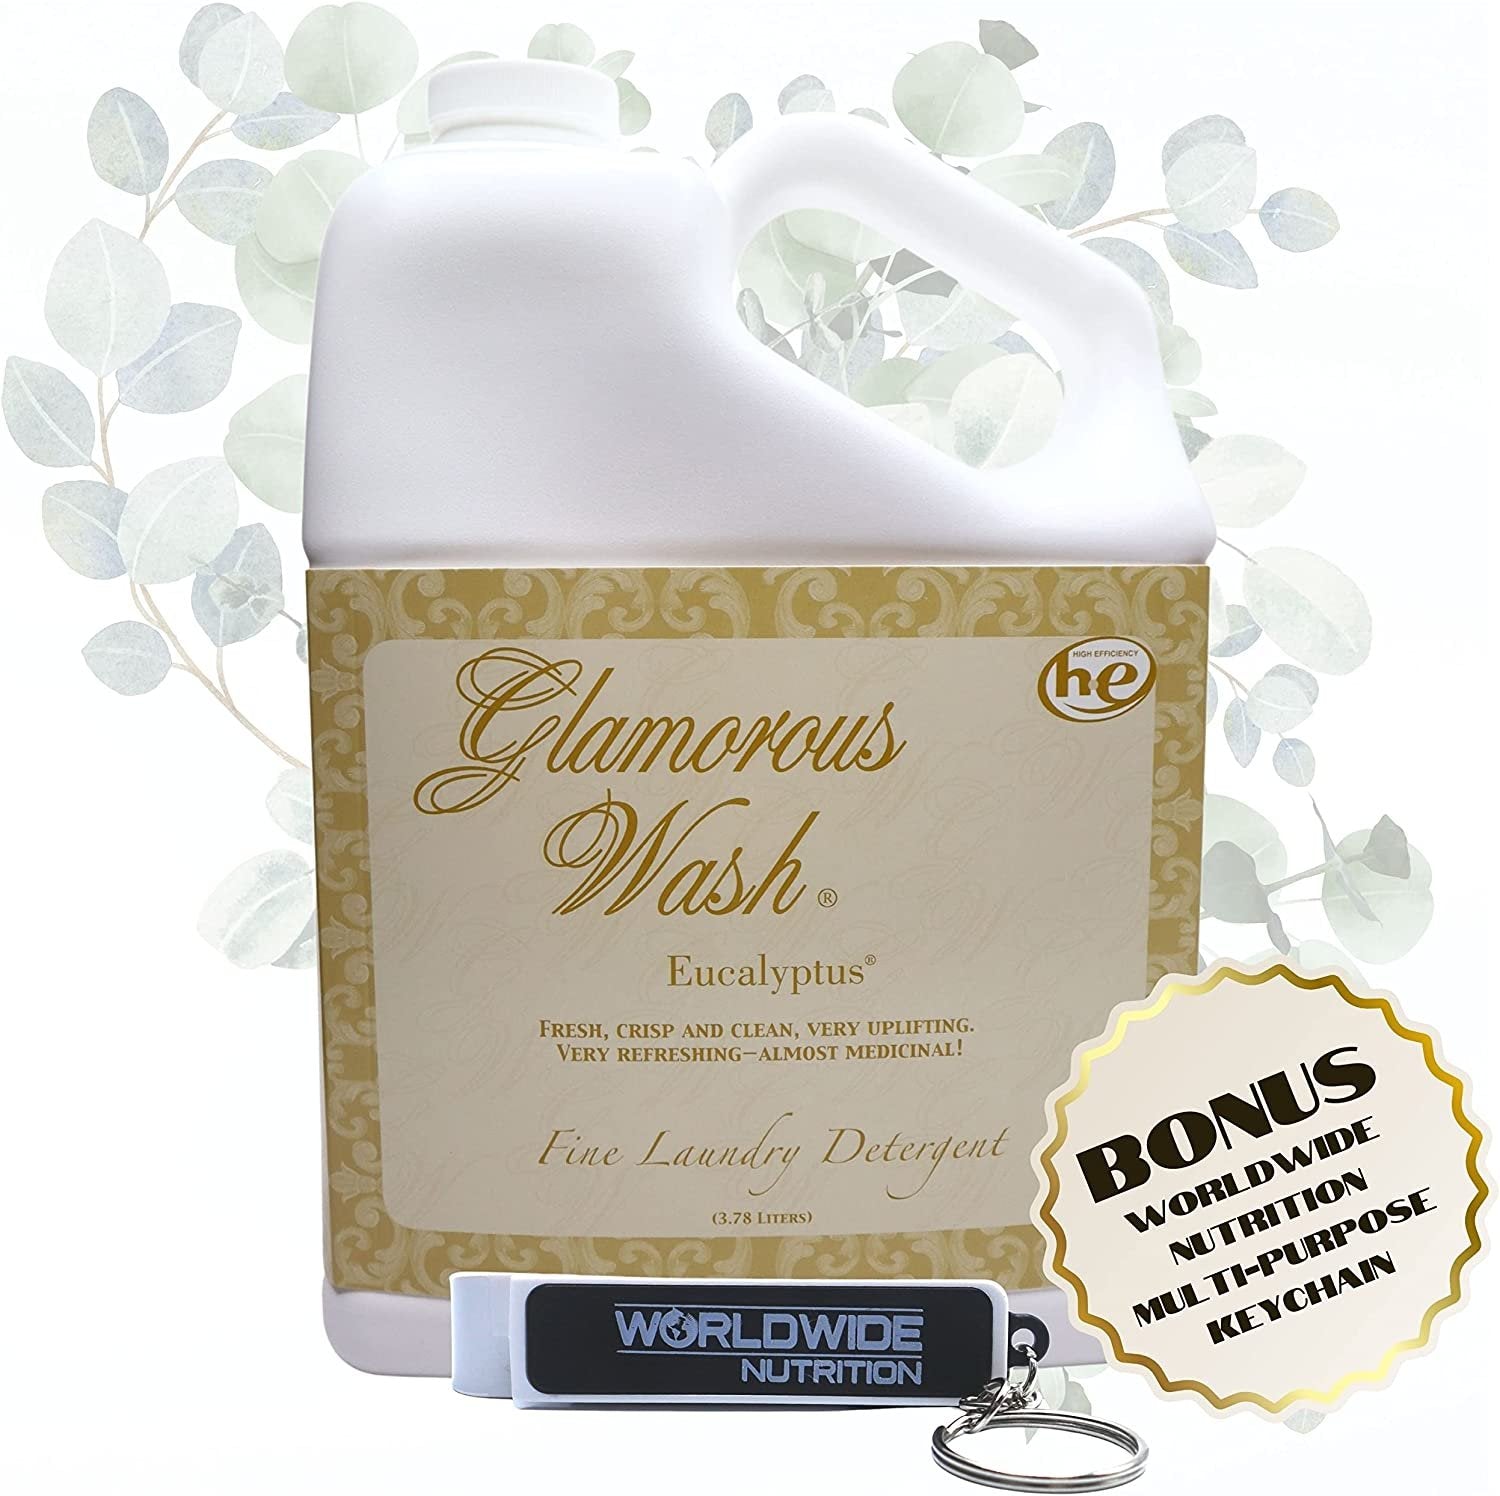 Tyler Candle Company Glamorous Wash Eucalyptus Scent Fine Laundry Liquid Detergent - Liquid Laundry Detergent for Clothing - Hand and Machine Washable - 3.78L (1Gal) Container with Bonus Key Chain